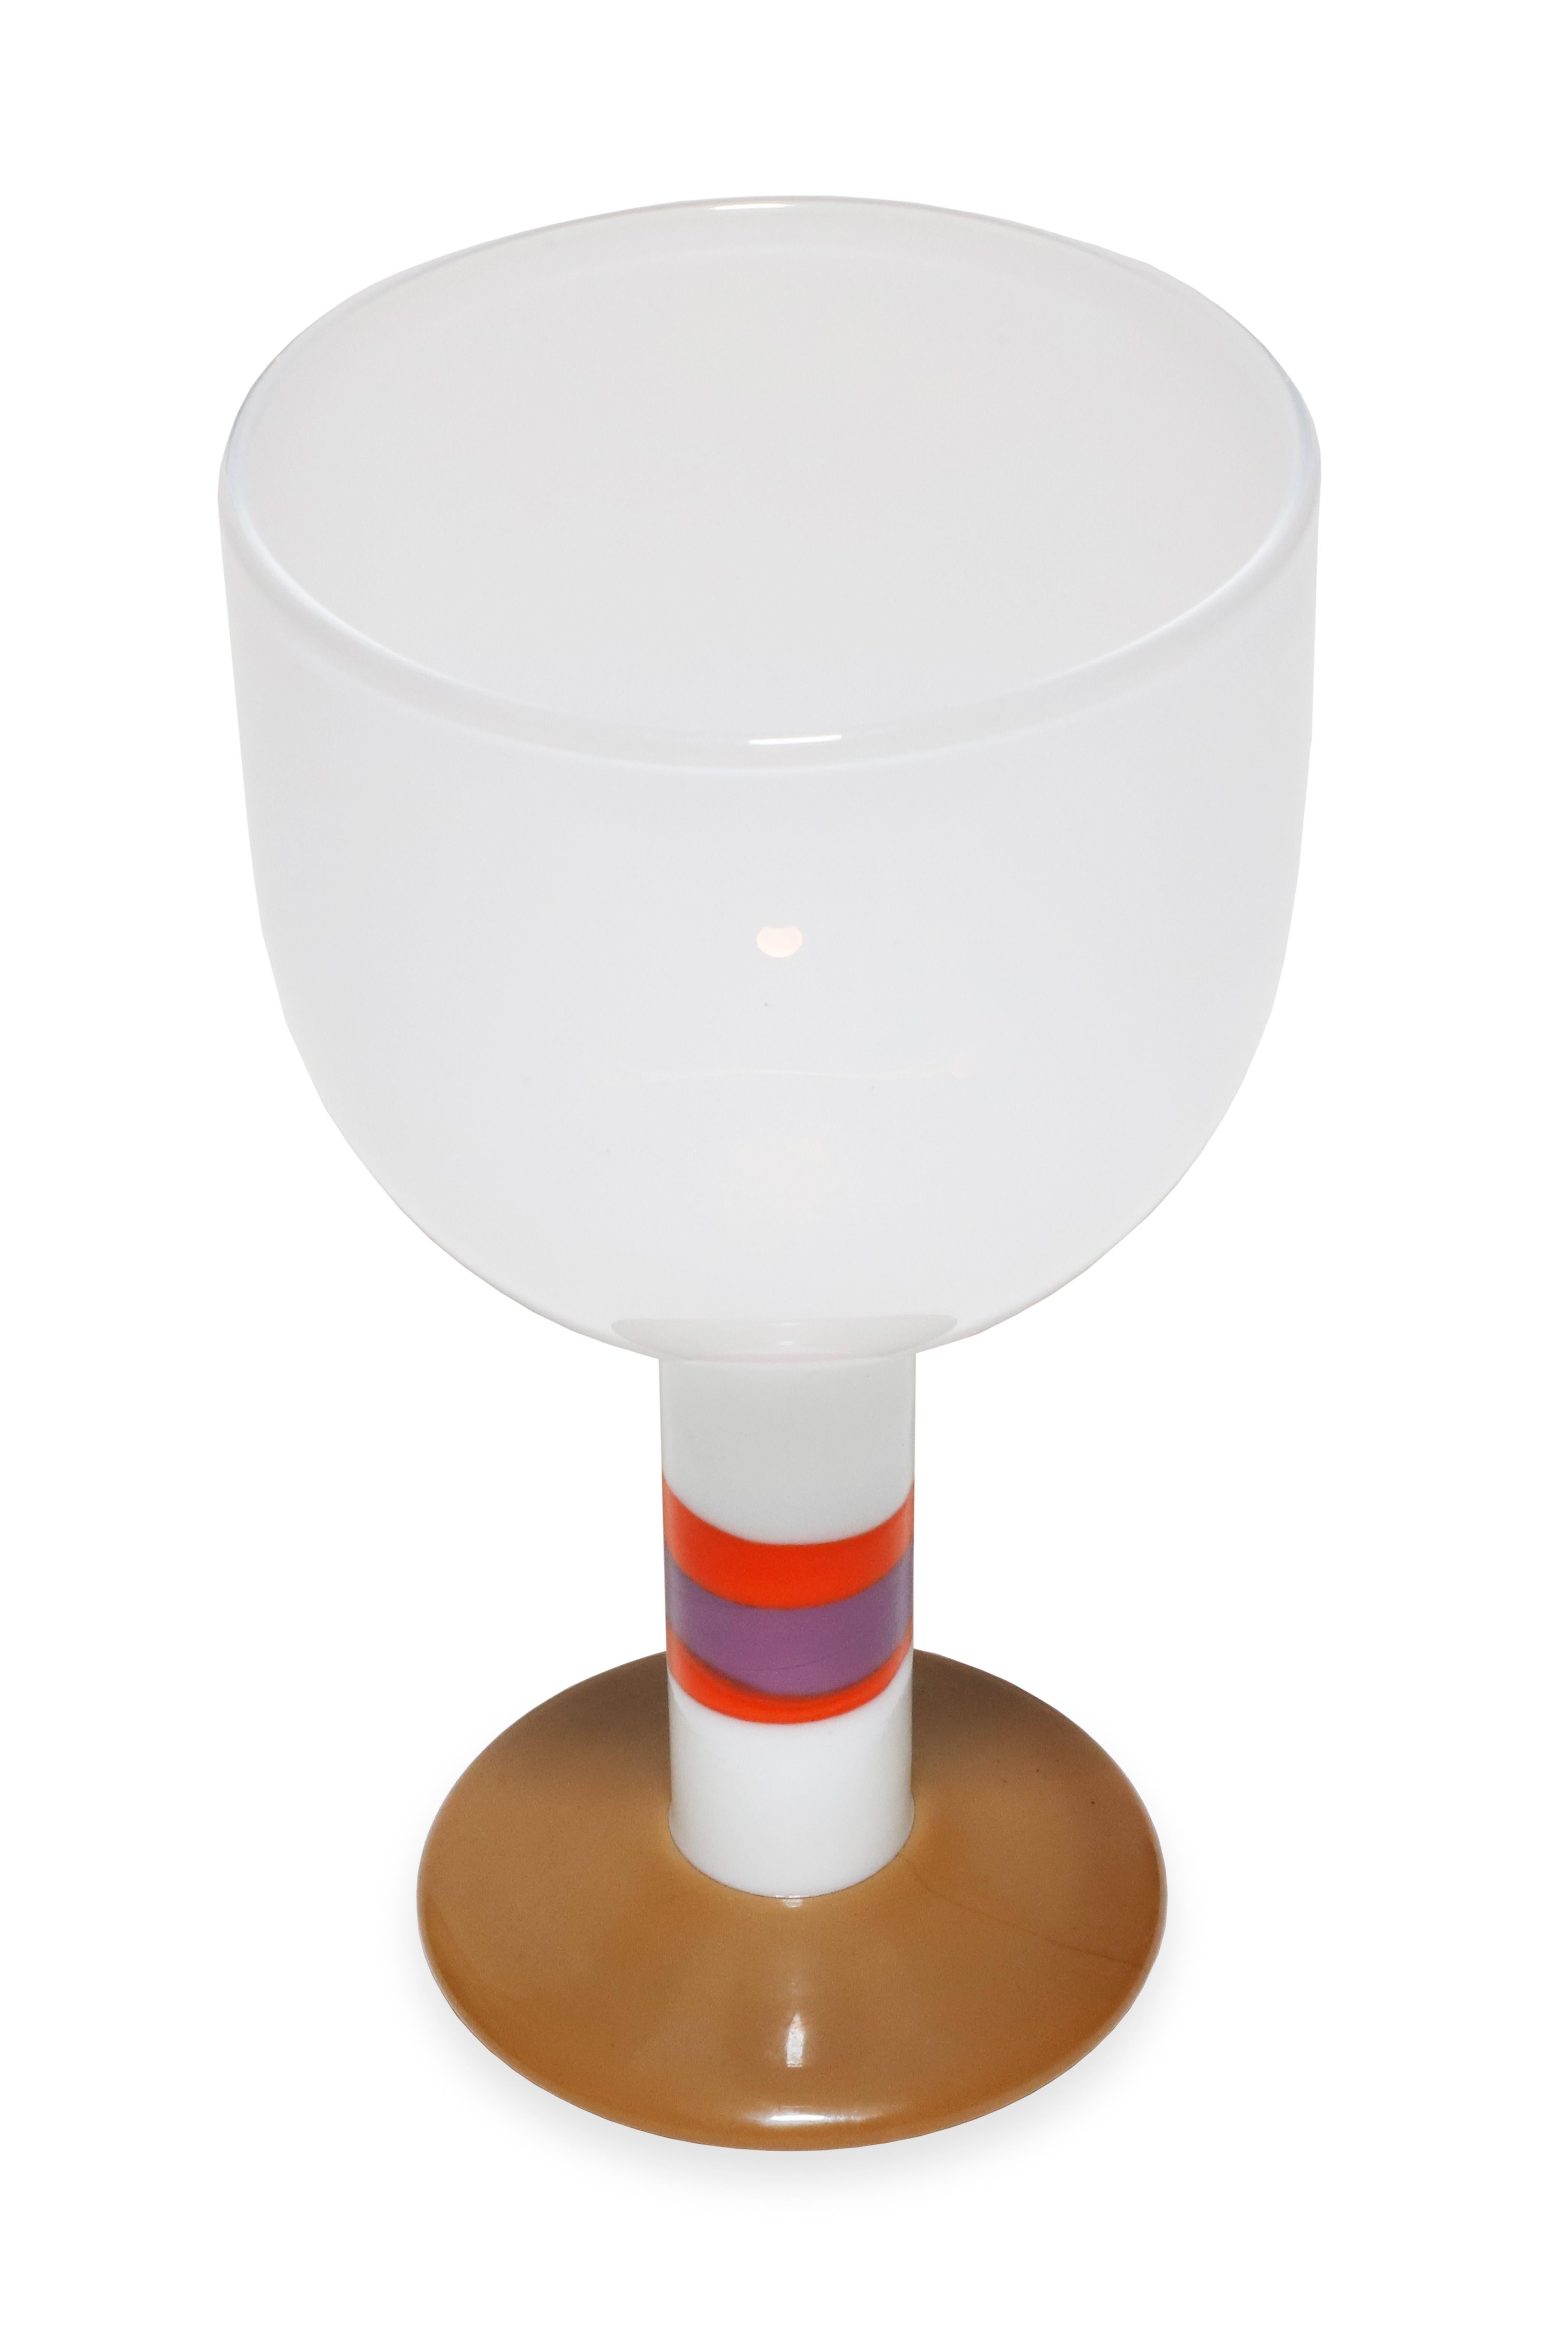 'Pop' goblet in white, with a orange and purple detail on handle and a beige vase. Designed by the Swedish designer Gunnar Cyren and produced by Orrefors, circa 1968. Engraved signature on bottom 